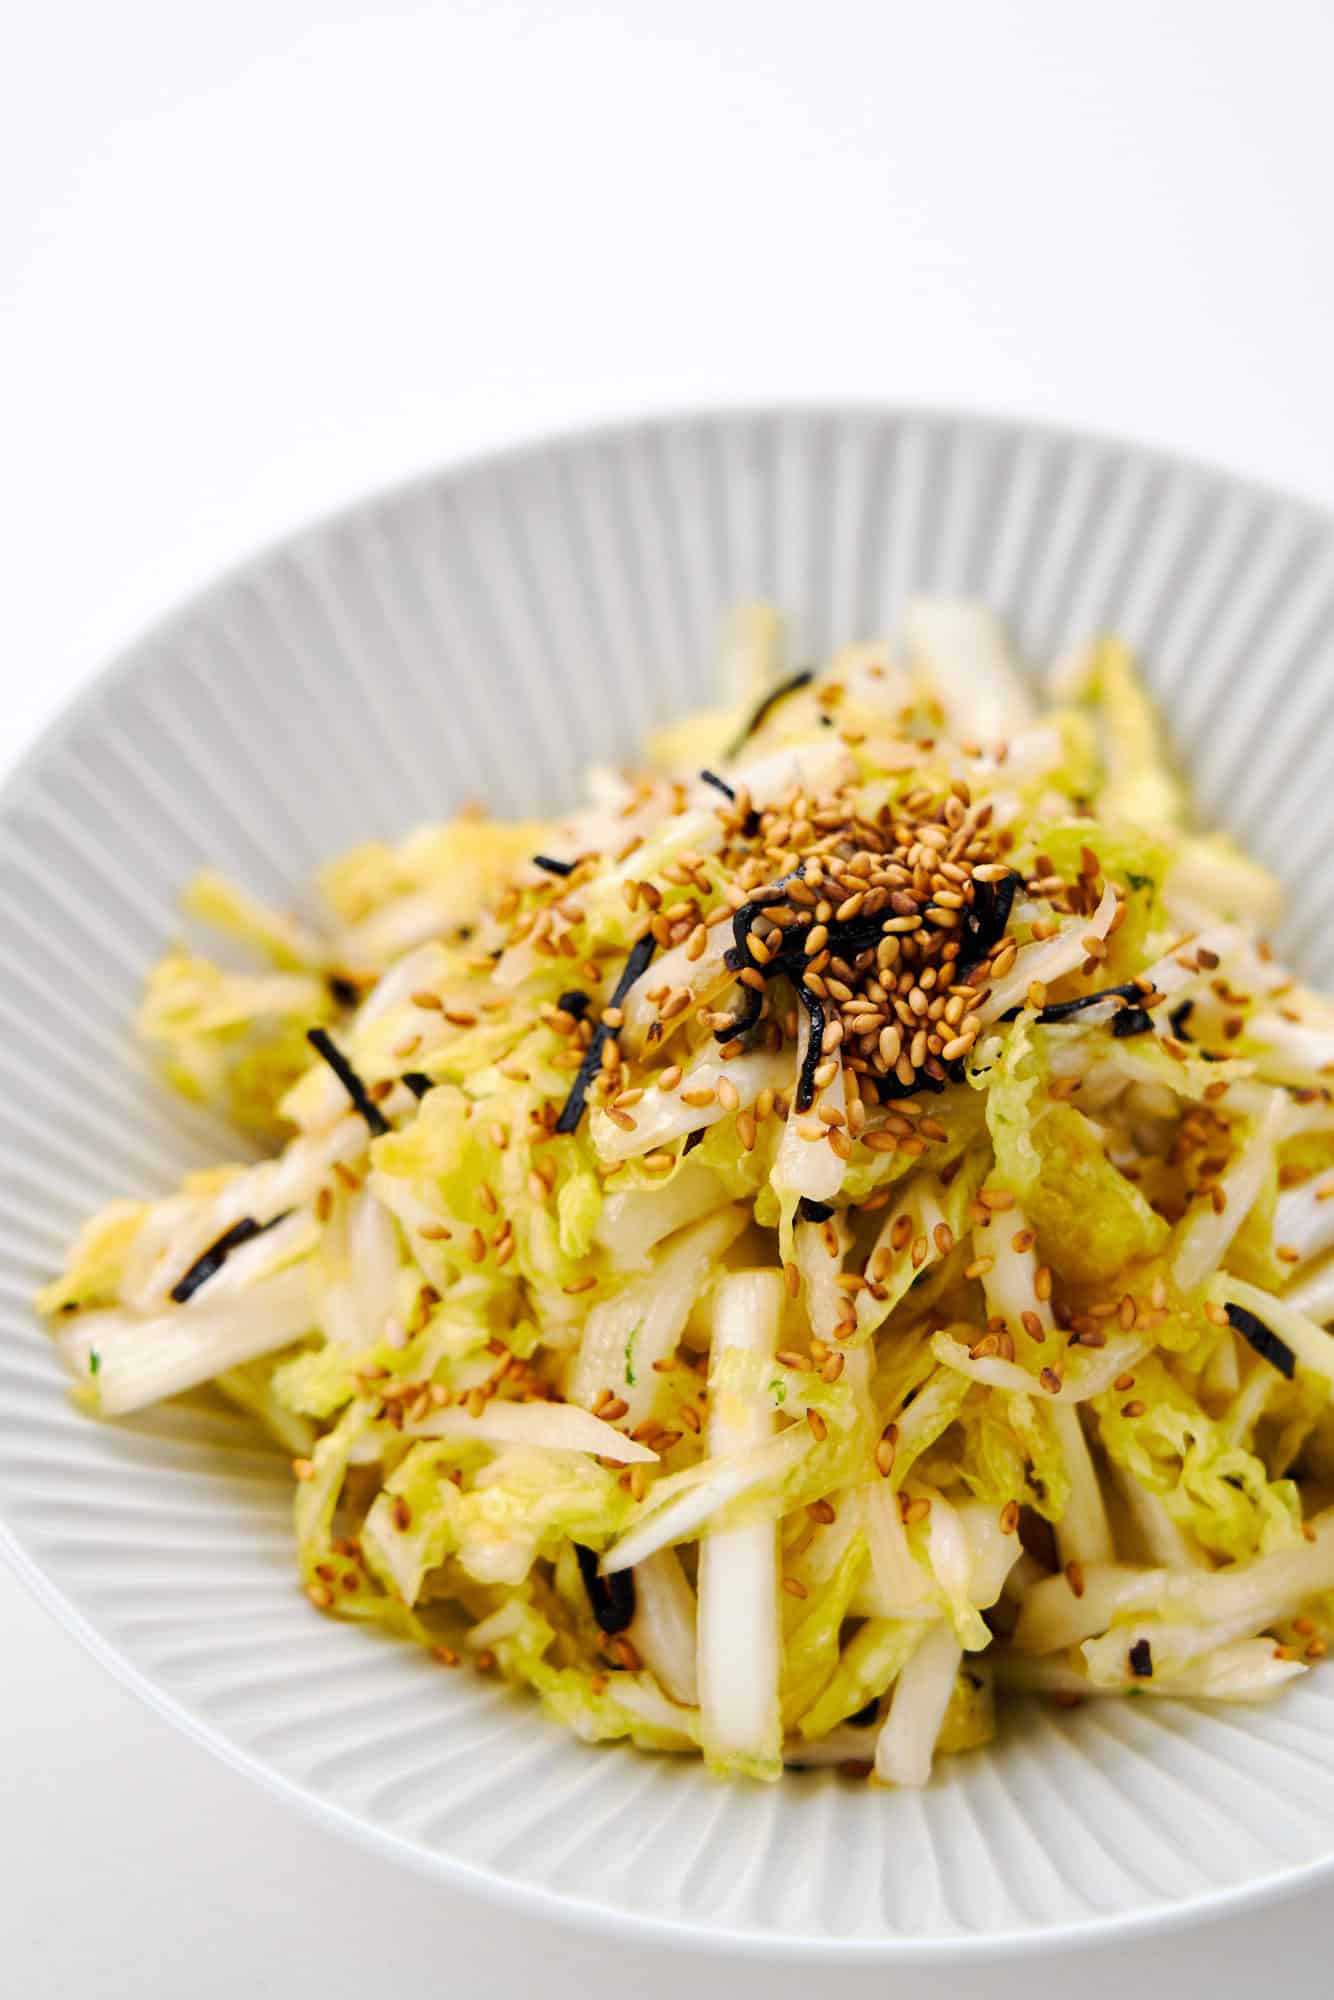 This delicious autumn salad pairs sweet and tender napa cabbage with nutty toasted sesame oil and umami rich salted konbu.